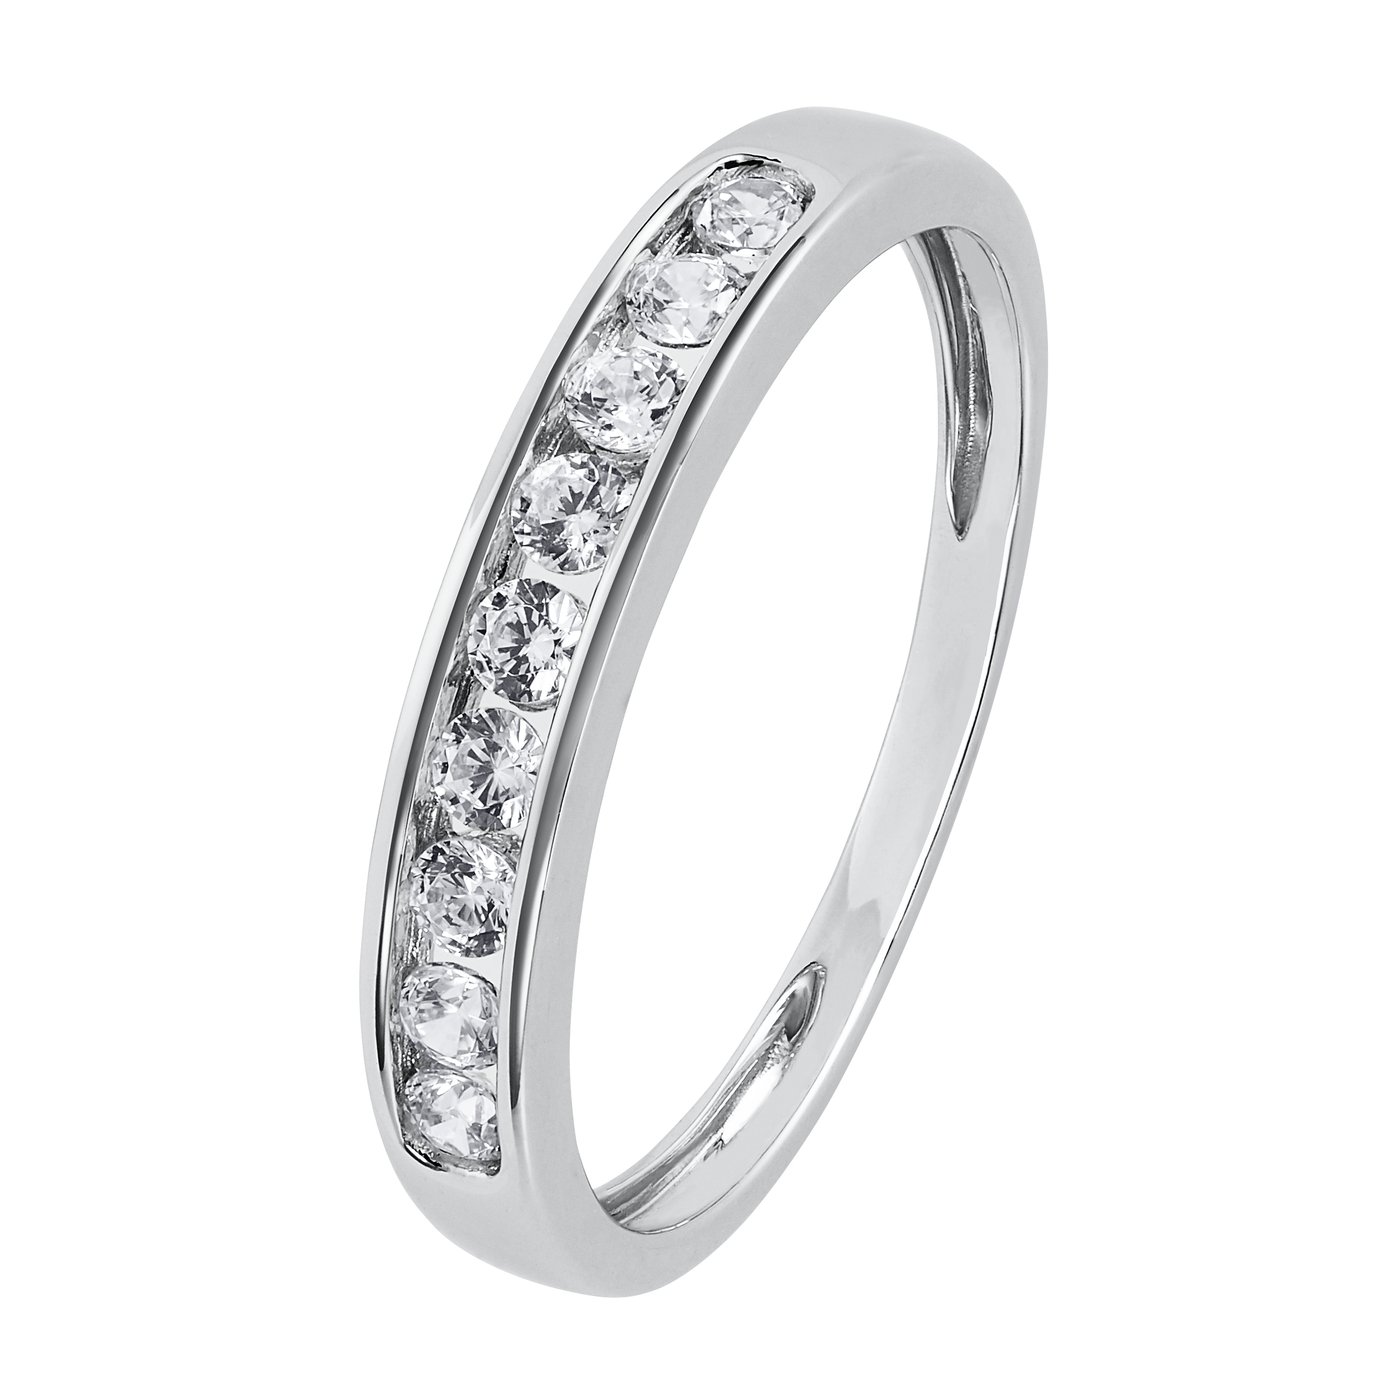 Revere 9ct White Gold Cubic Zirconia Eternity Ring - N